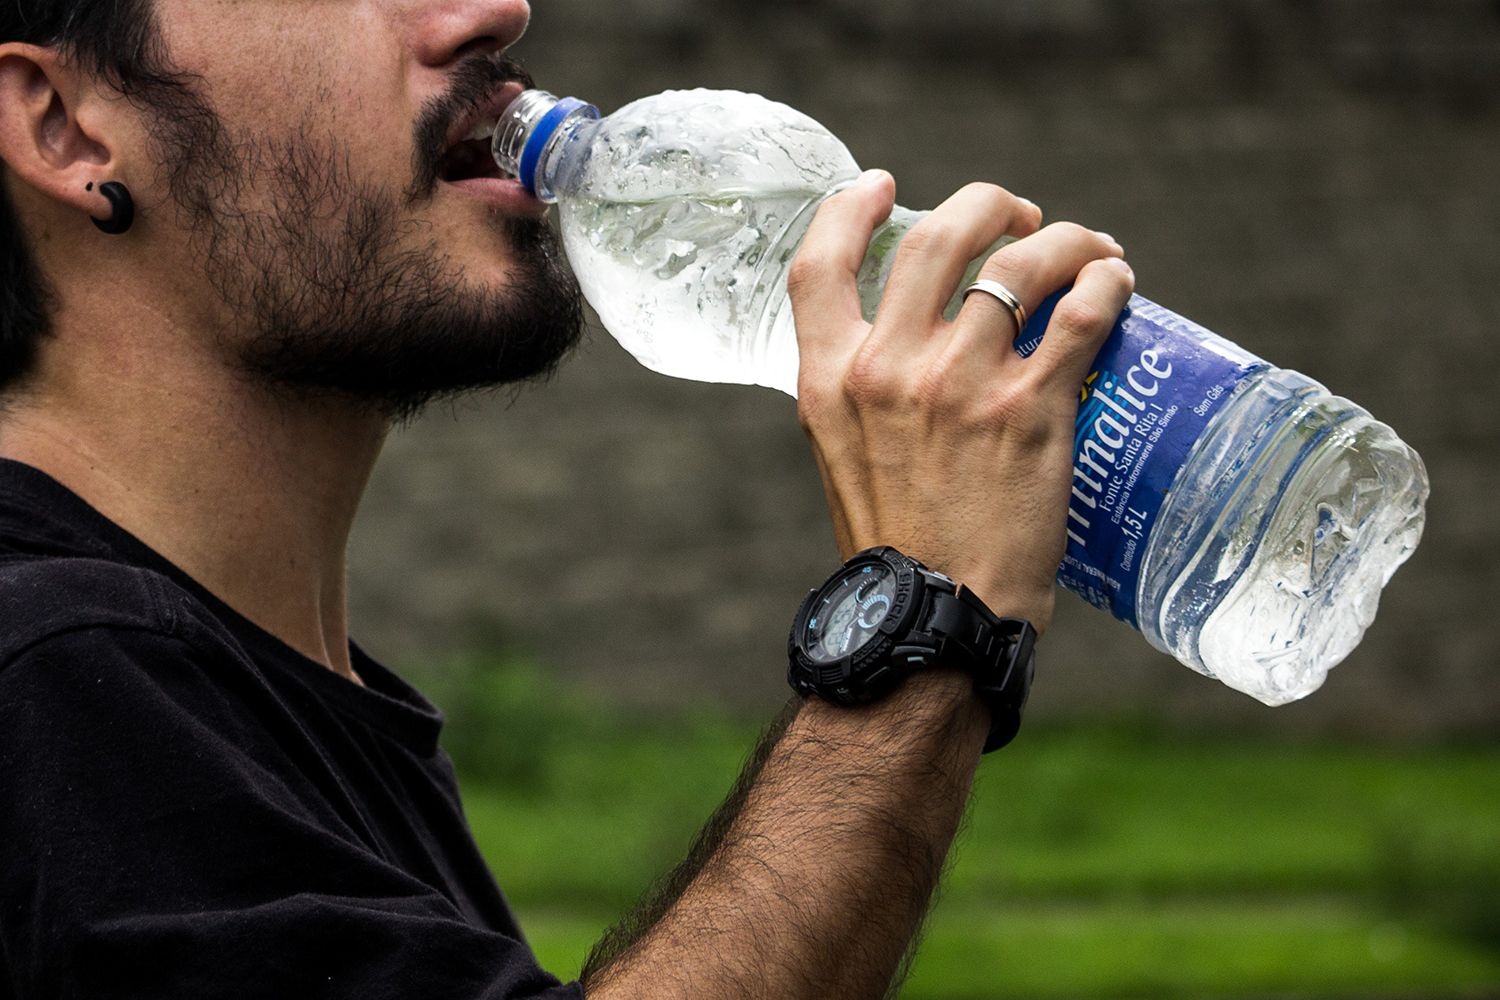 What you should know about drinking water (but probably don't)